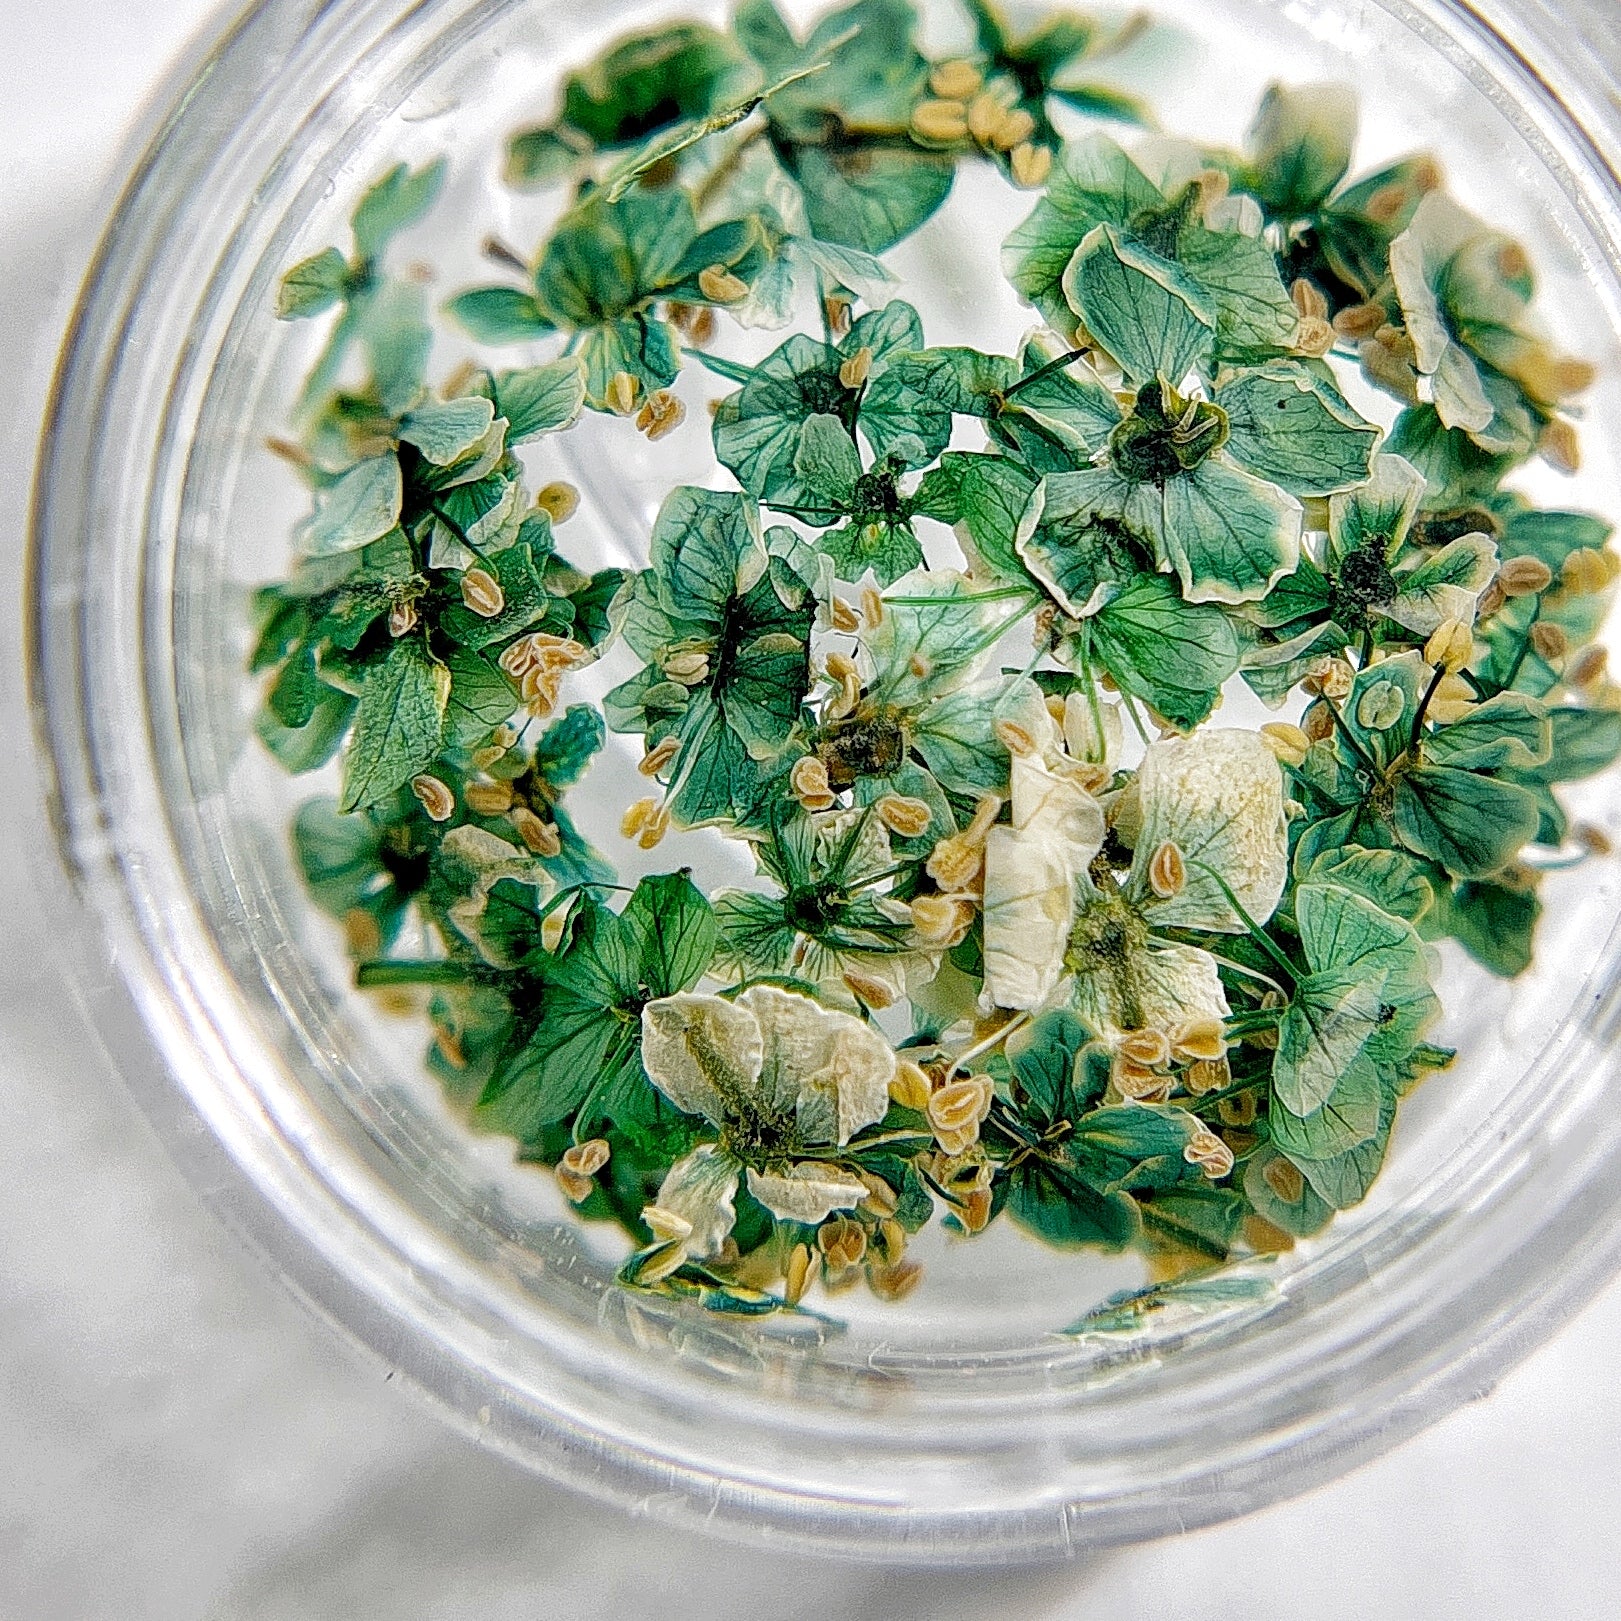 Petite Bloom in Pine - Multi-Tonal PDeep Green Pressed Flower Mix in Jar, Presented on White Background.